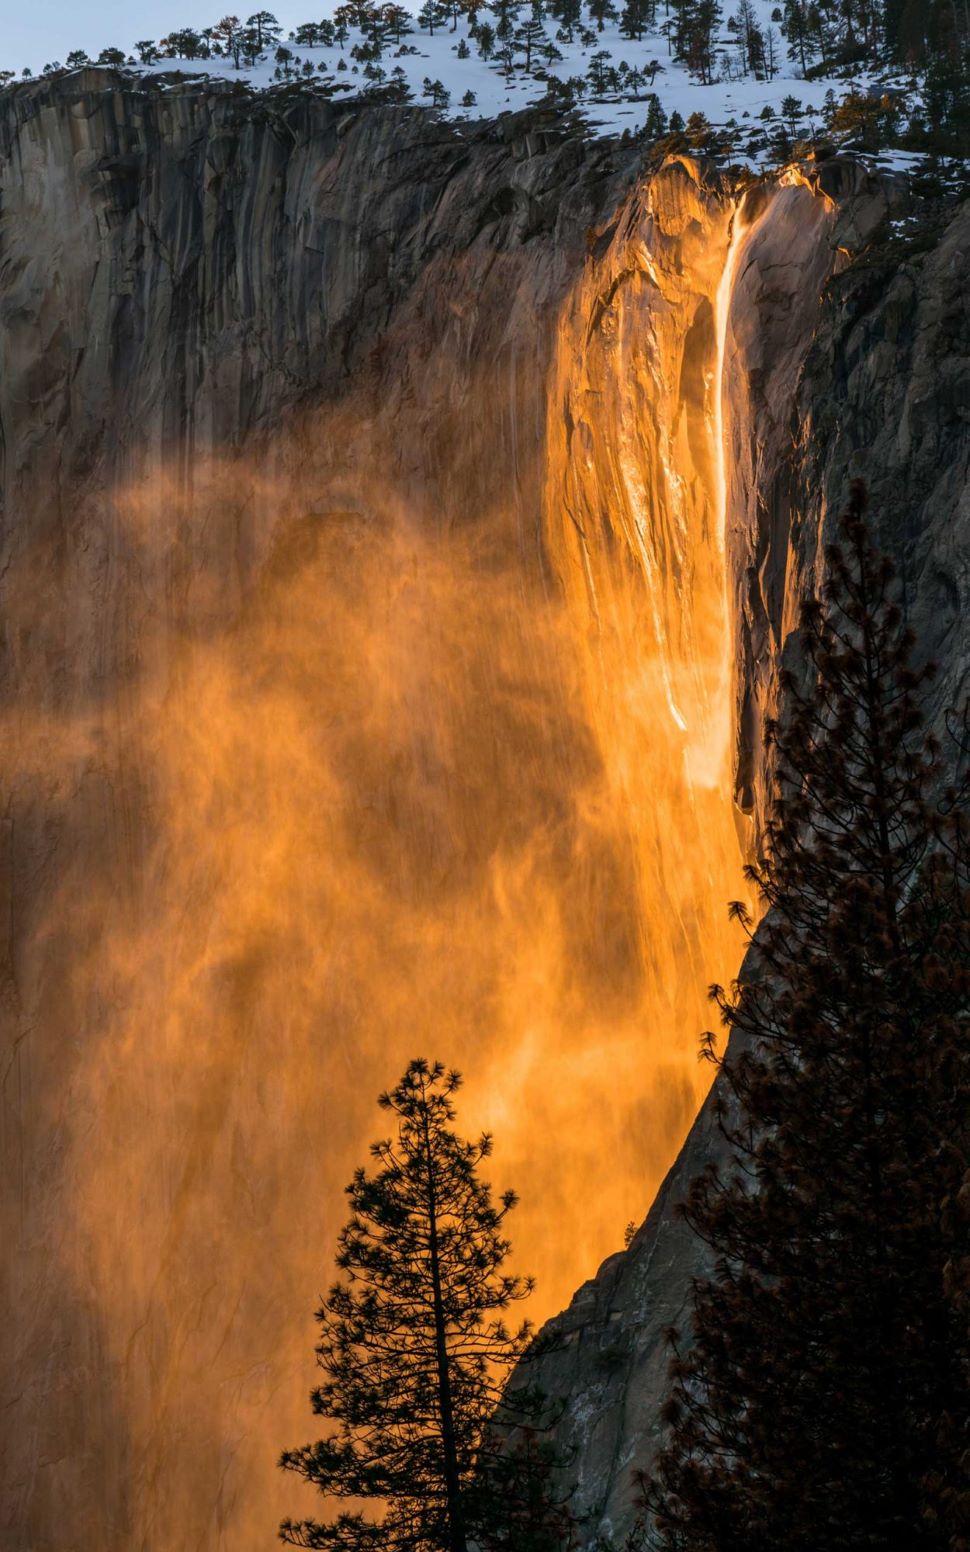 Yosemite Firefall: The Mysterious Structure Of Nature! Here Lava Falls From The Waterfall